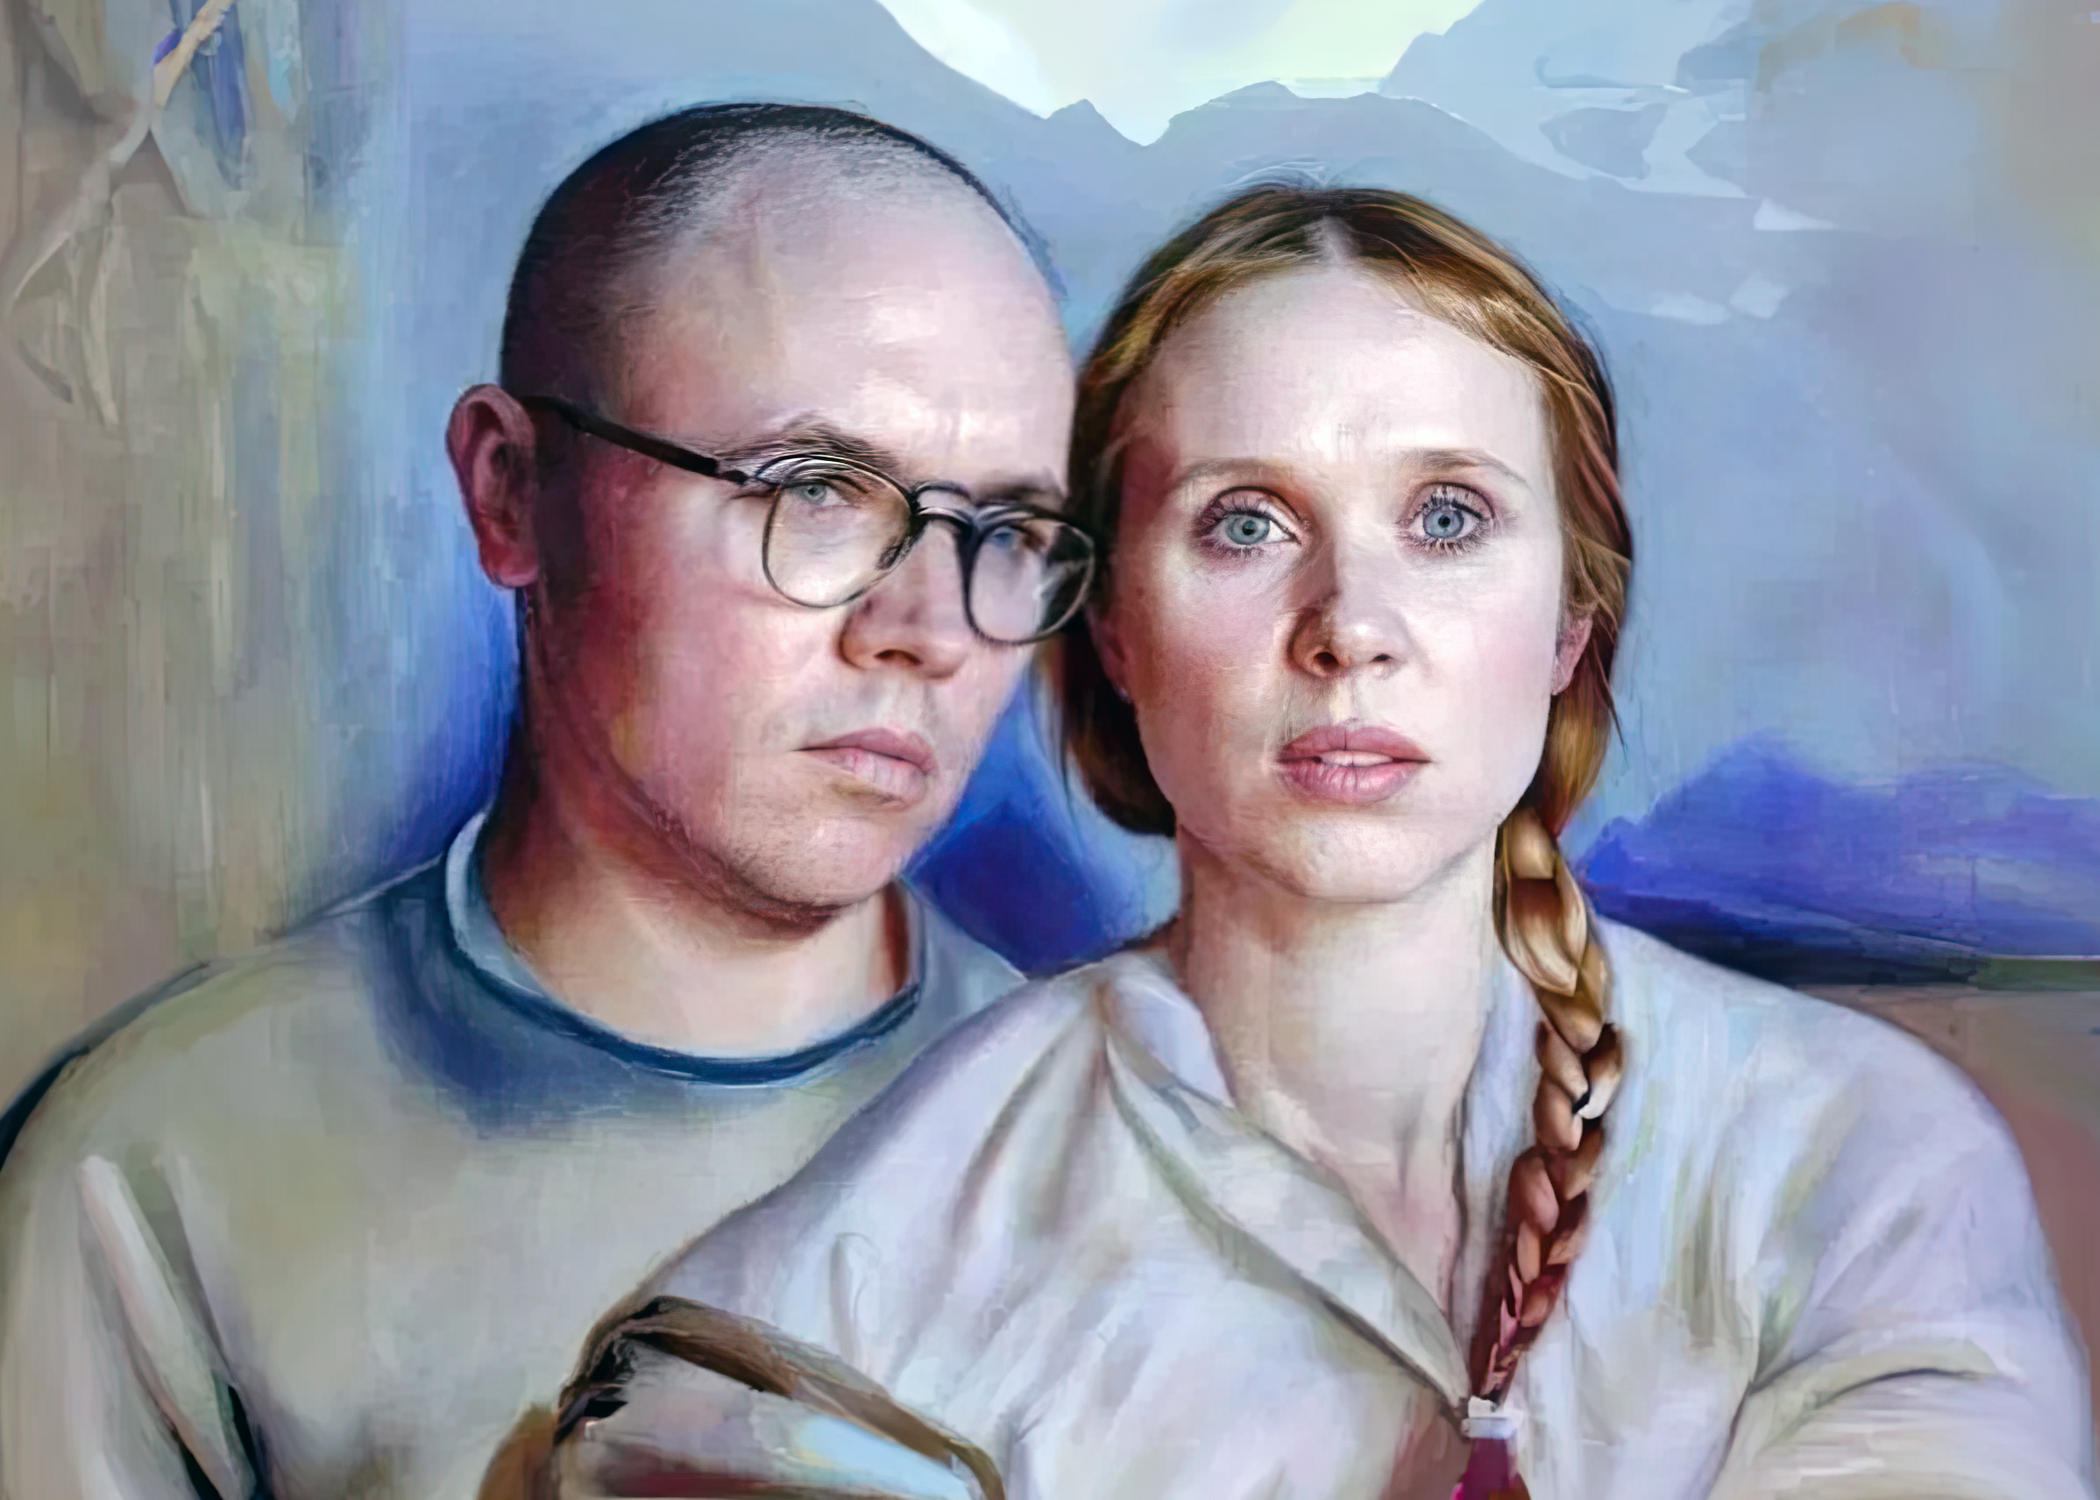 An illustrated portrait of Mathew Dryhurst and Holly Herndon.